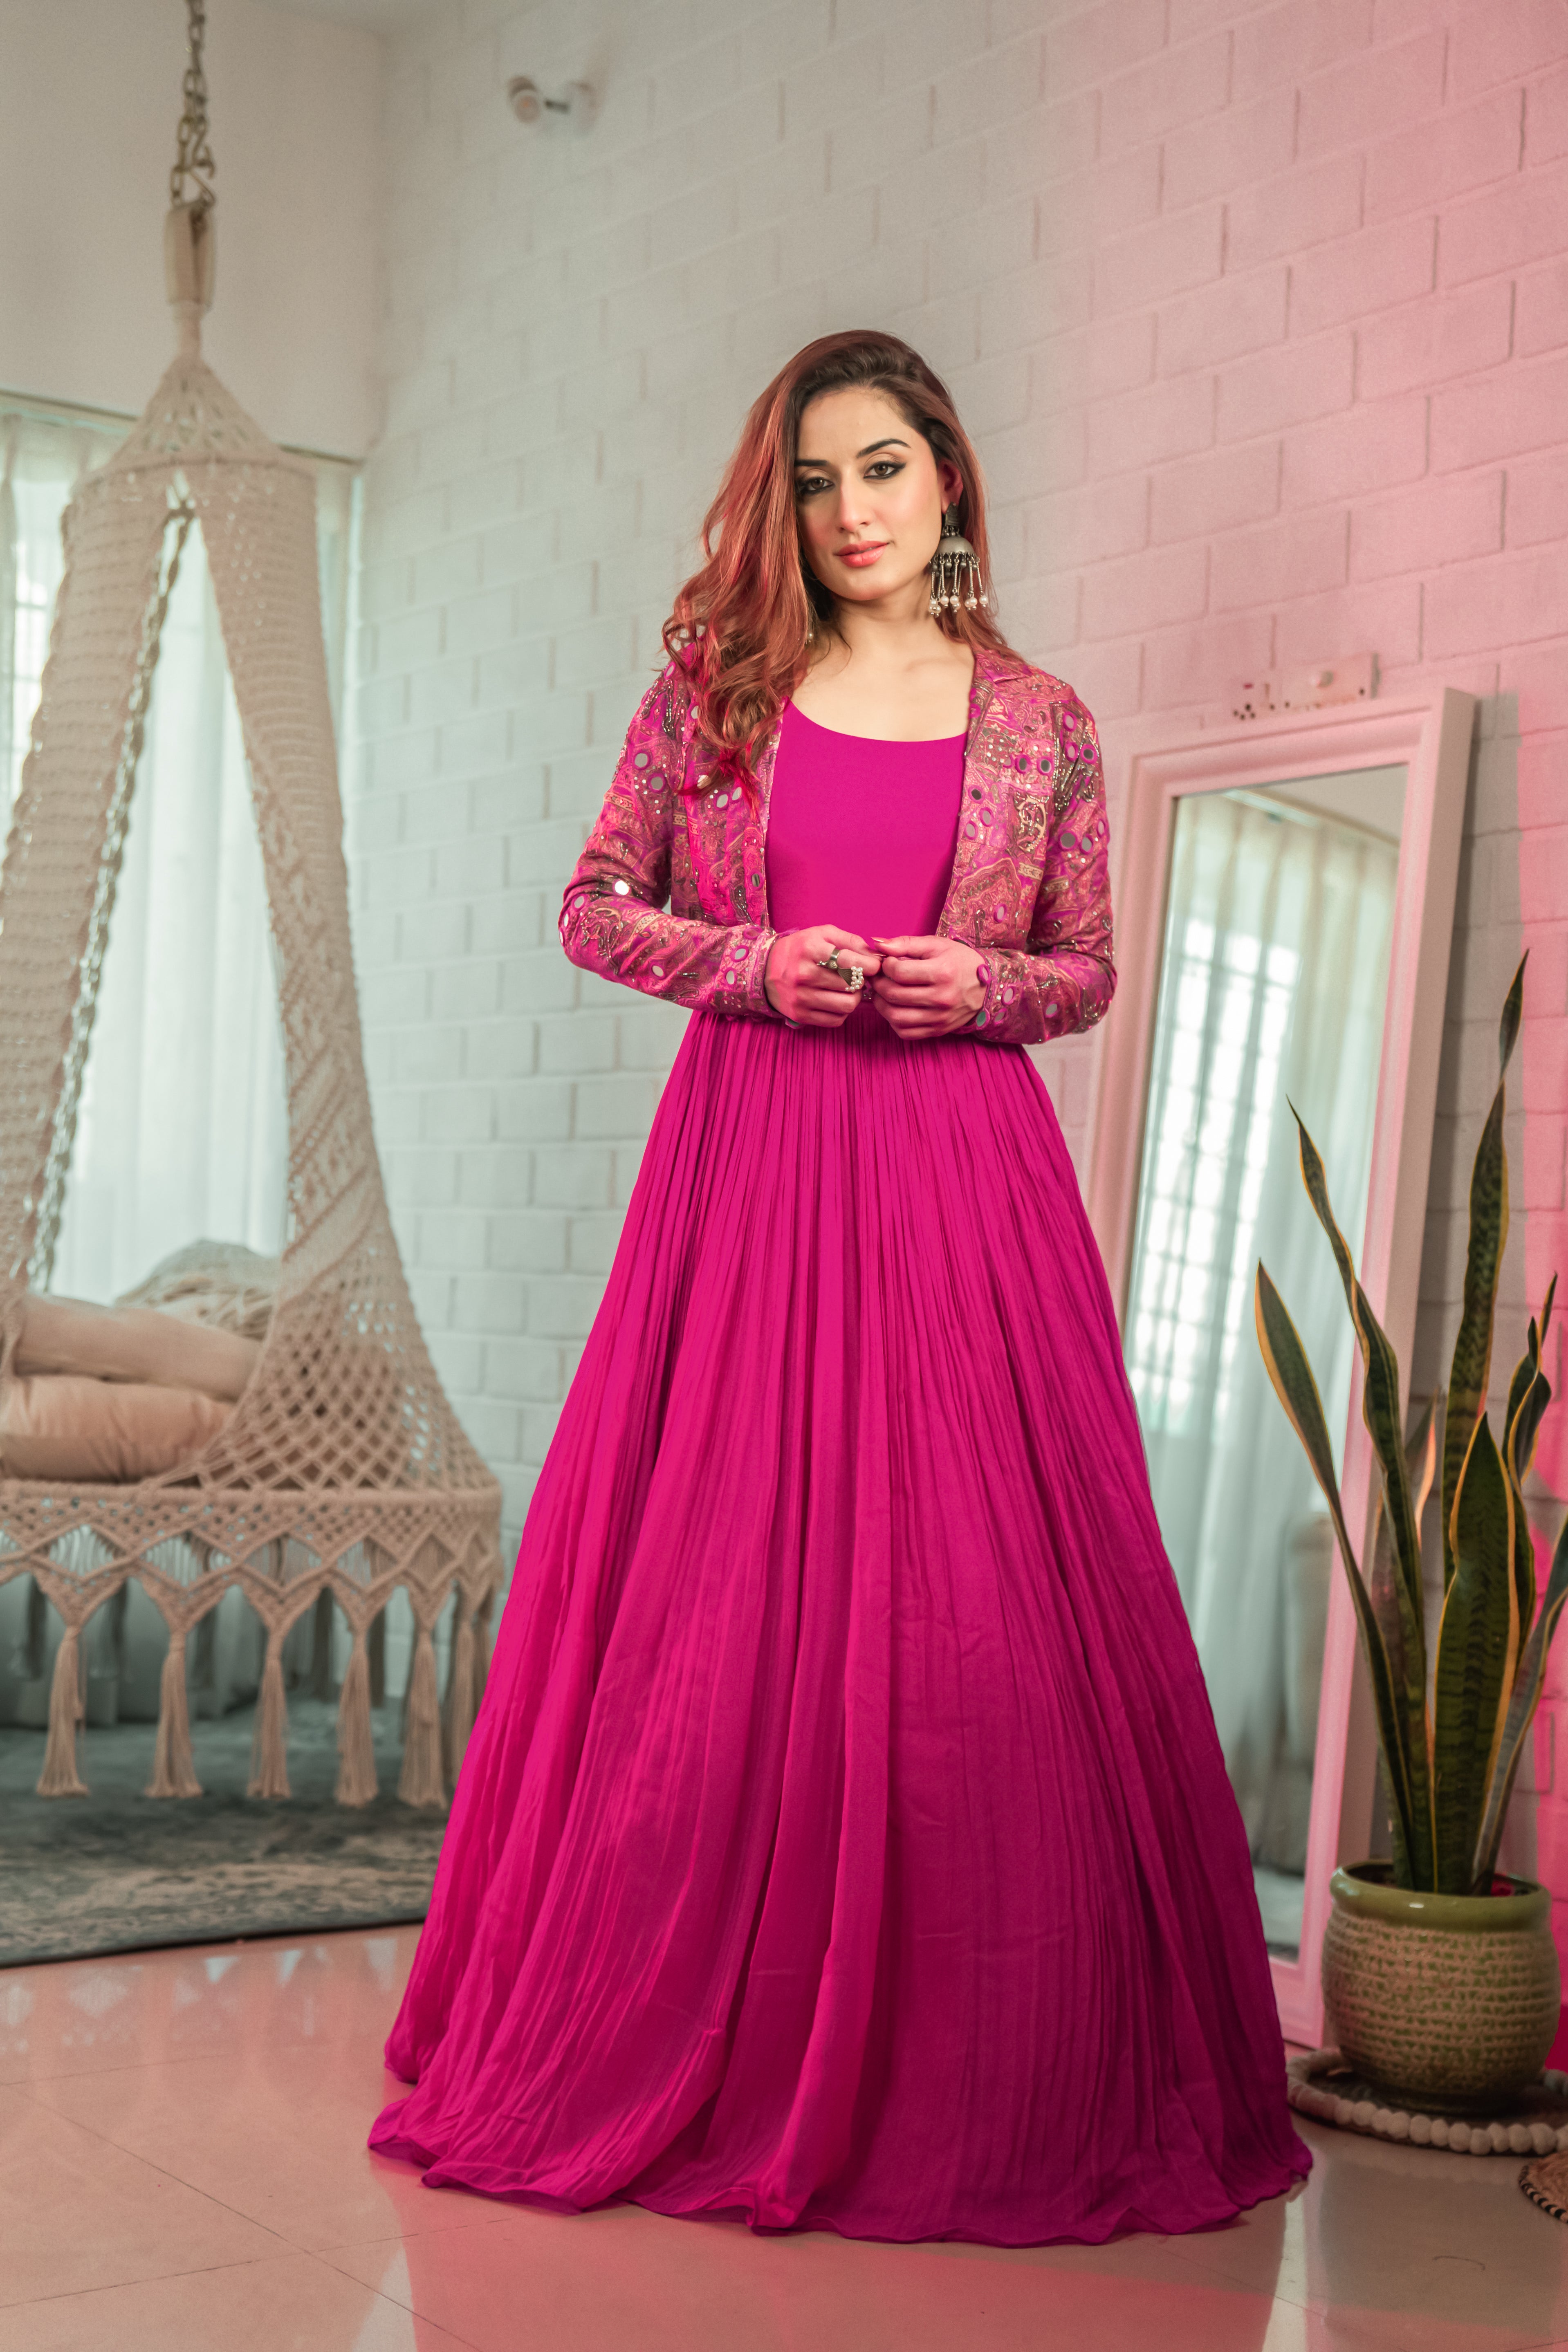 Majestic Magenta Pink Stunning Evening Gown